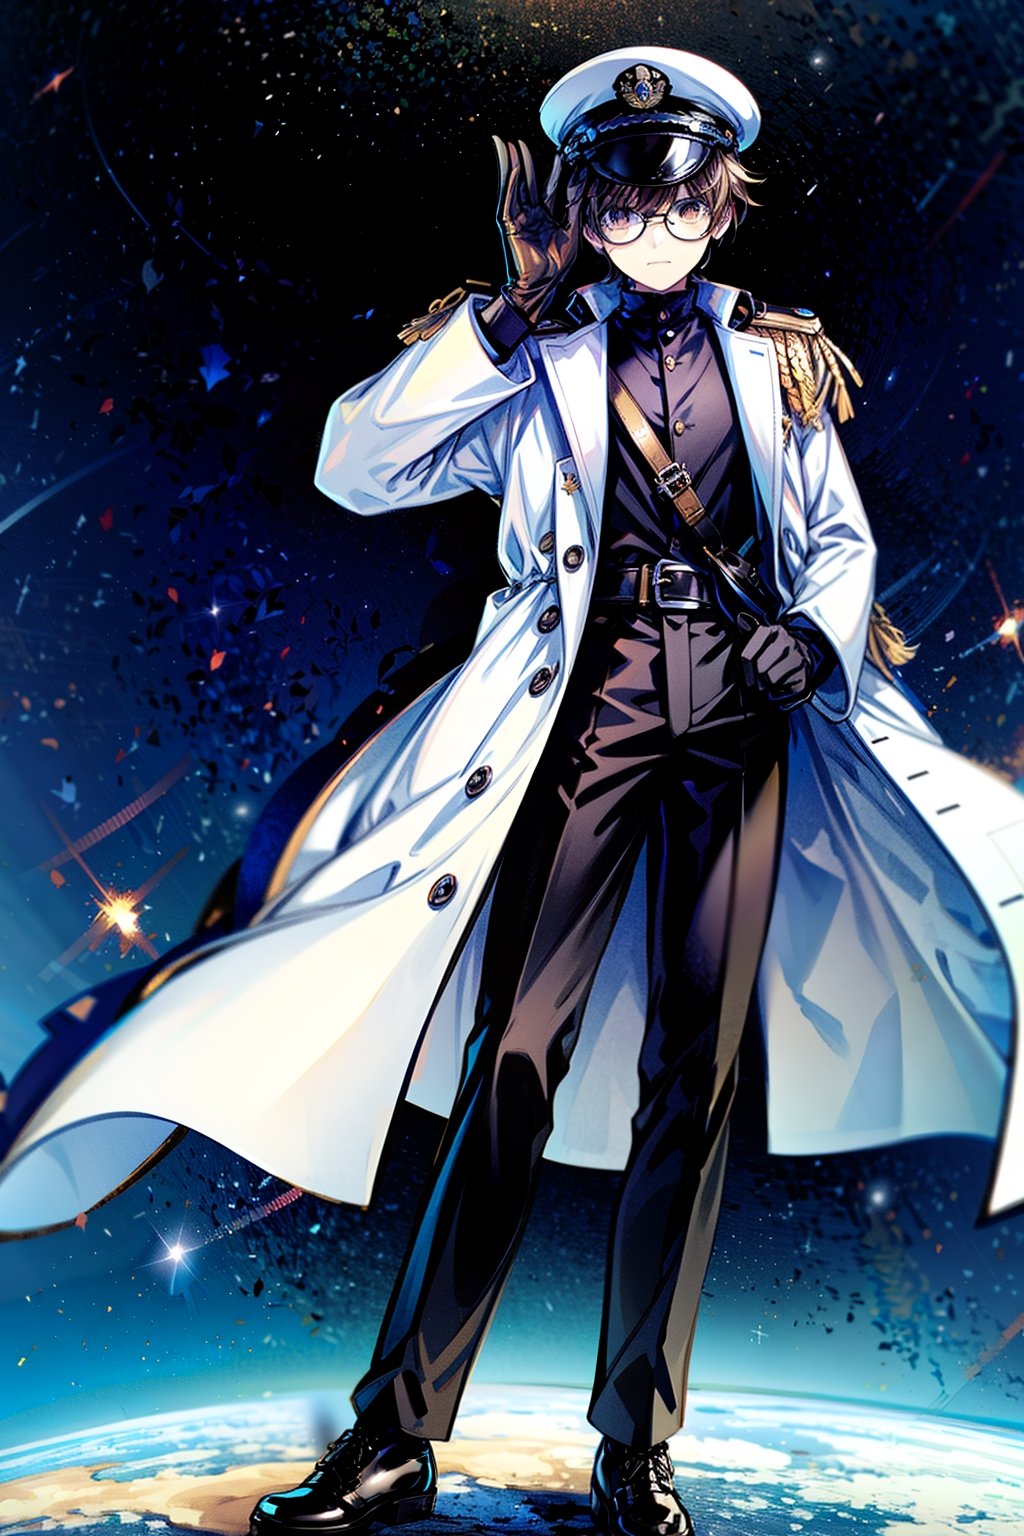 Hight Detailed, Hight Quality, Masterpiece,Beatifull,(Mediun long short),1boy,Adjusting gloves,adjusting gloves, twenty year old young man, brown hair with irregular fragment white, brown amber eye color, tall, white Japanese military uniform, wears glasses, white captain's naval hat, white open trench coat, black belt, black shoes, space command center, detailed,